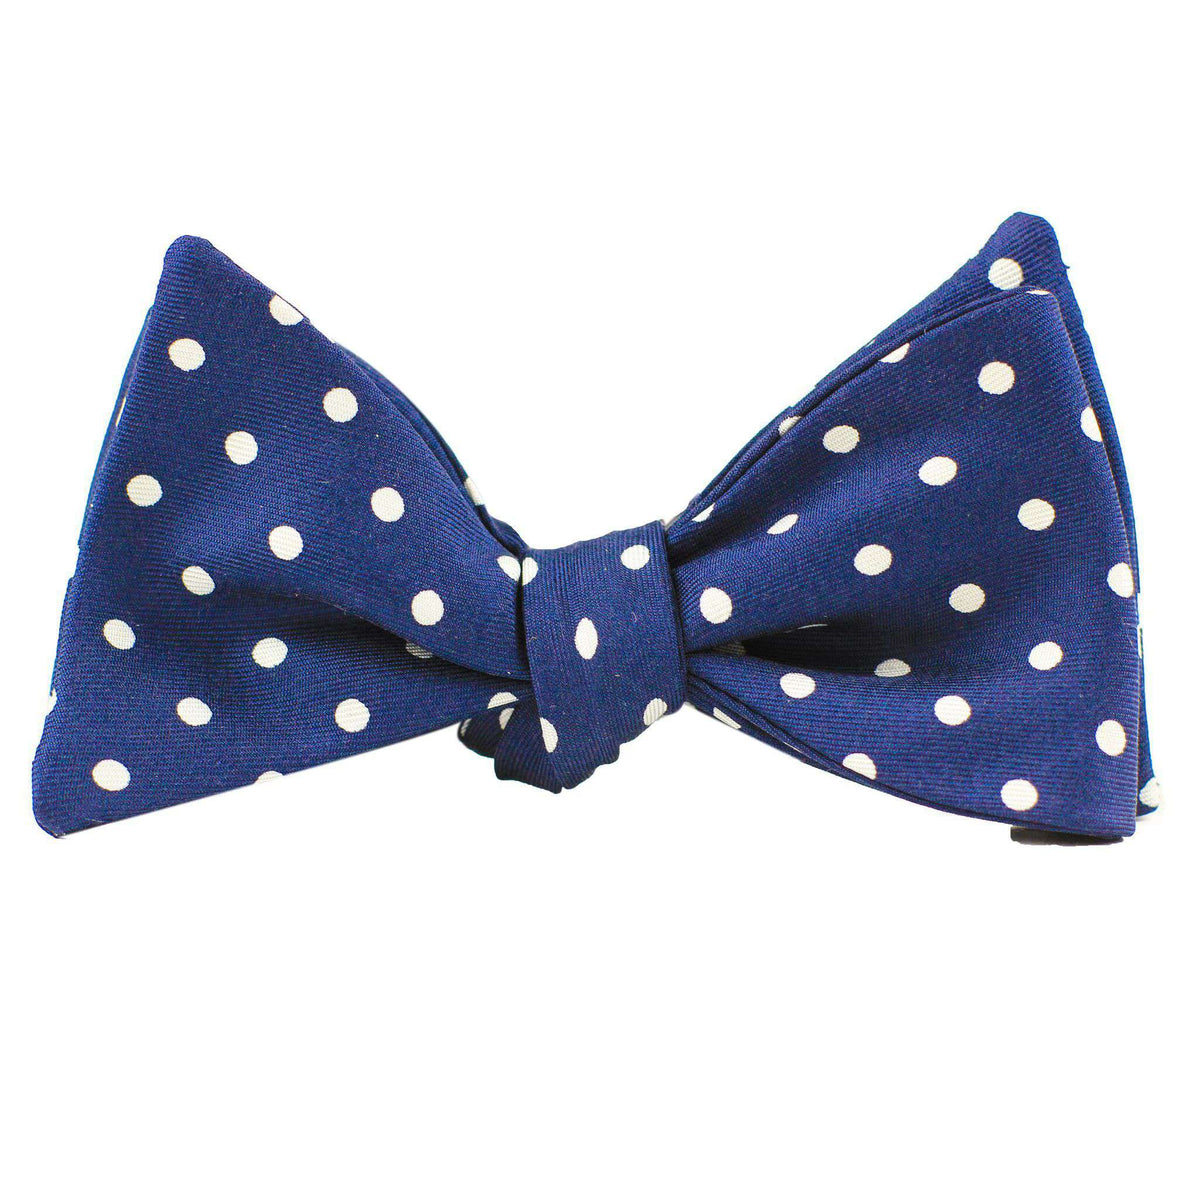 Silk Bow Tie in Navy with White Dots by Res Ipsa - Country Club Prep